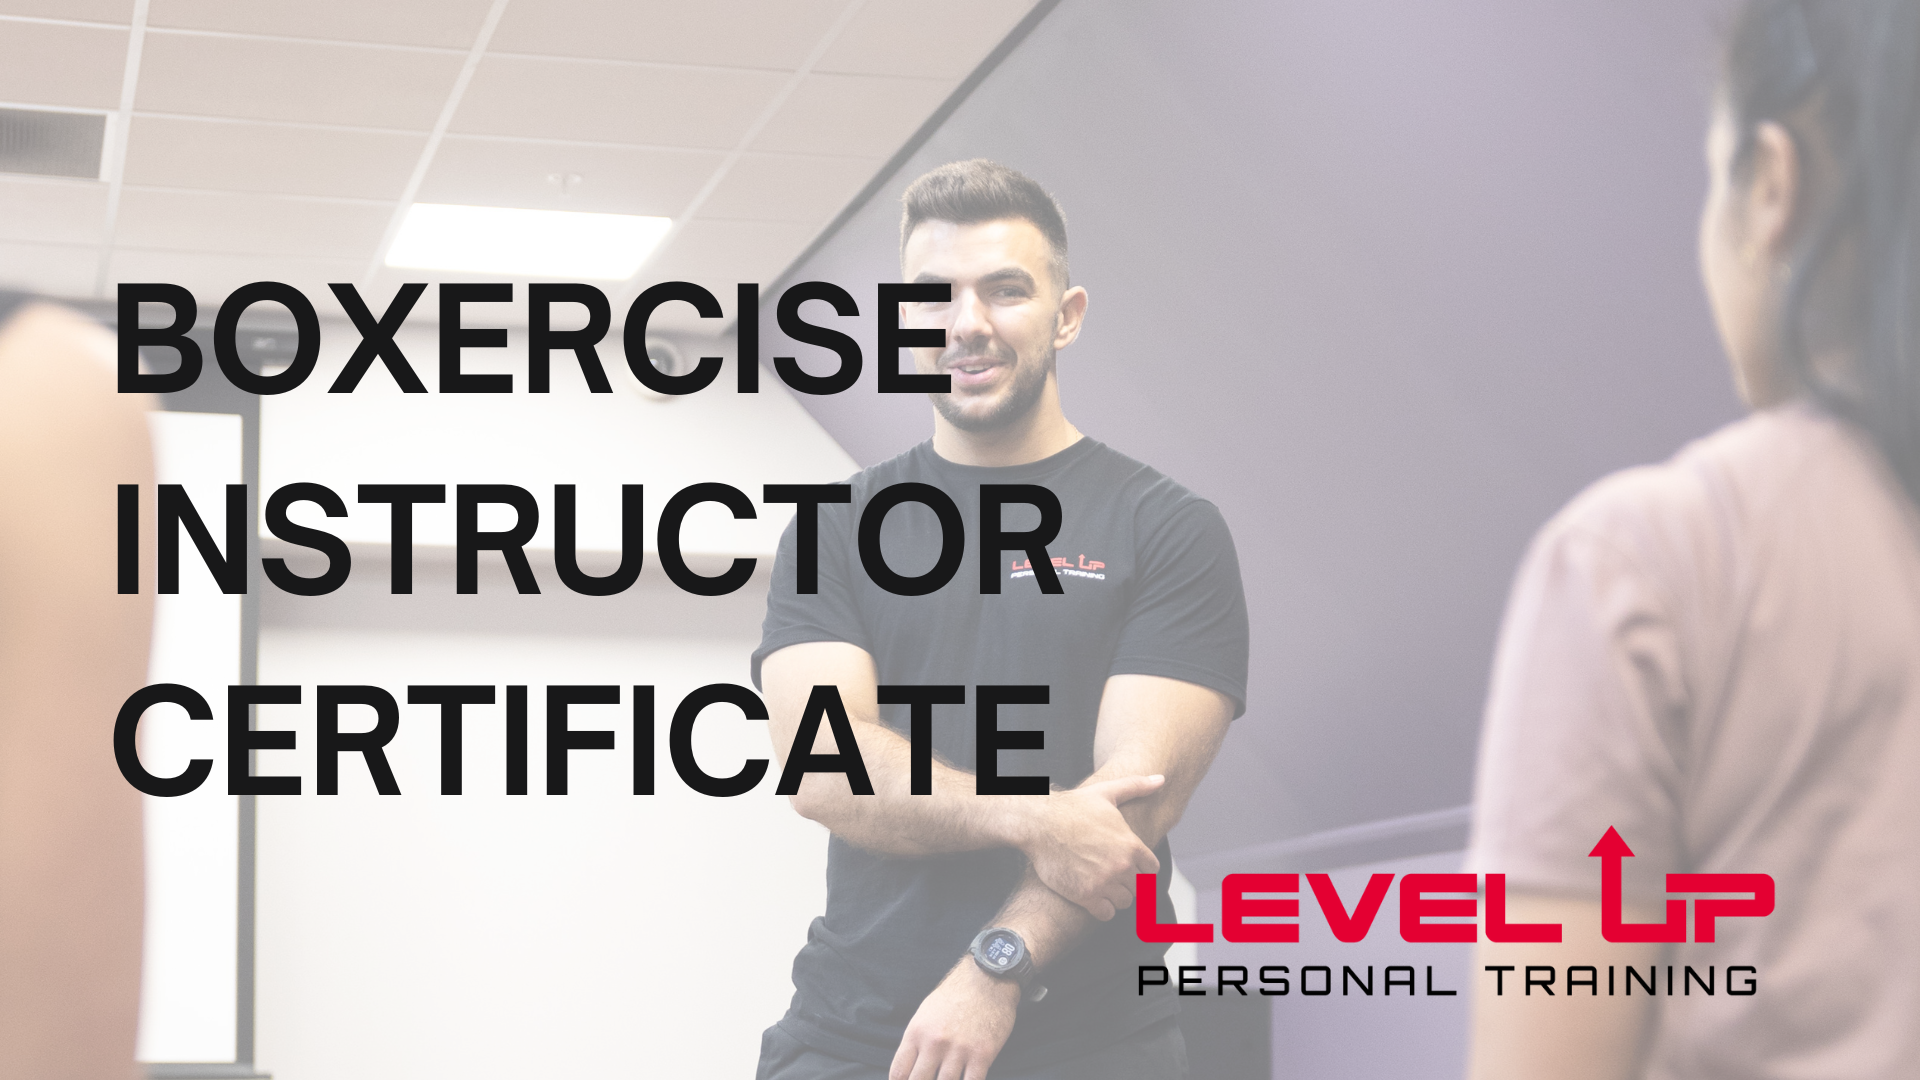 Boxercise Instructor Certificate